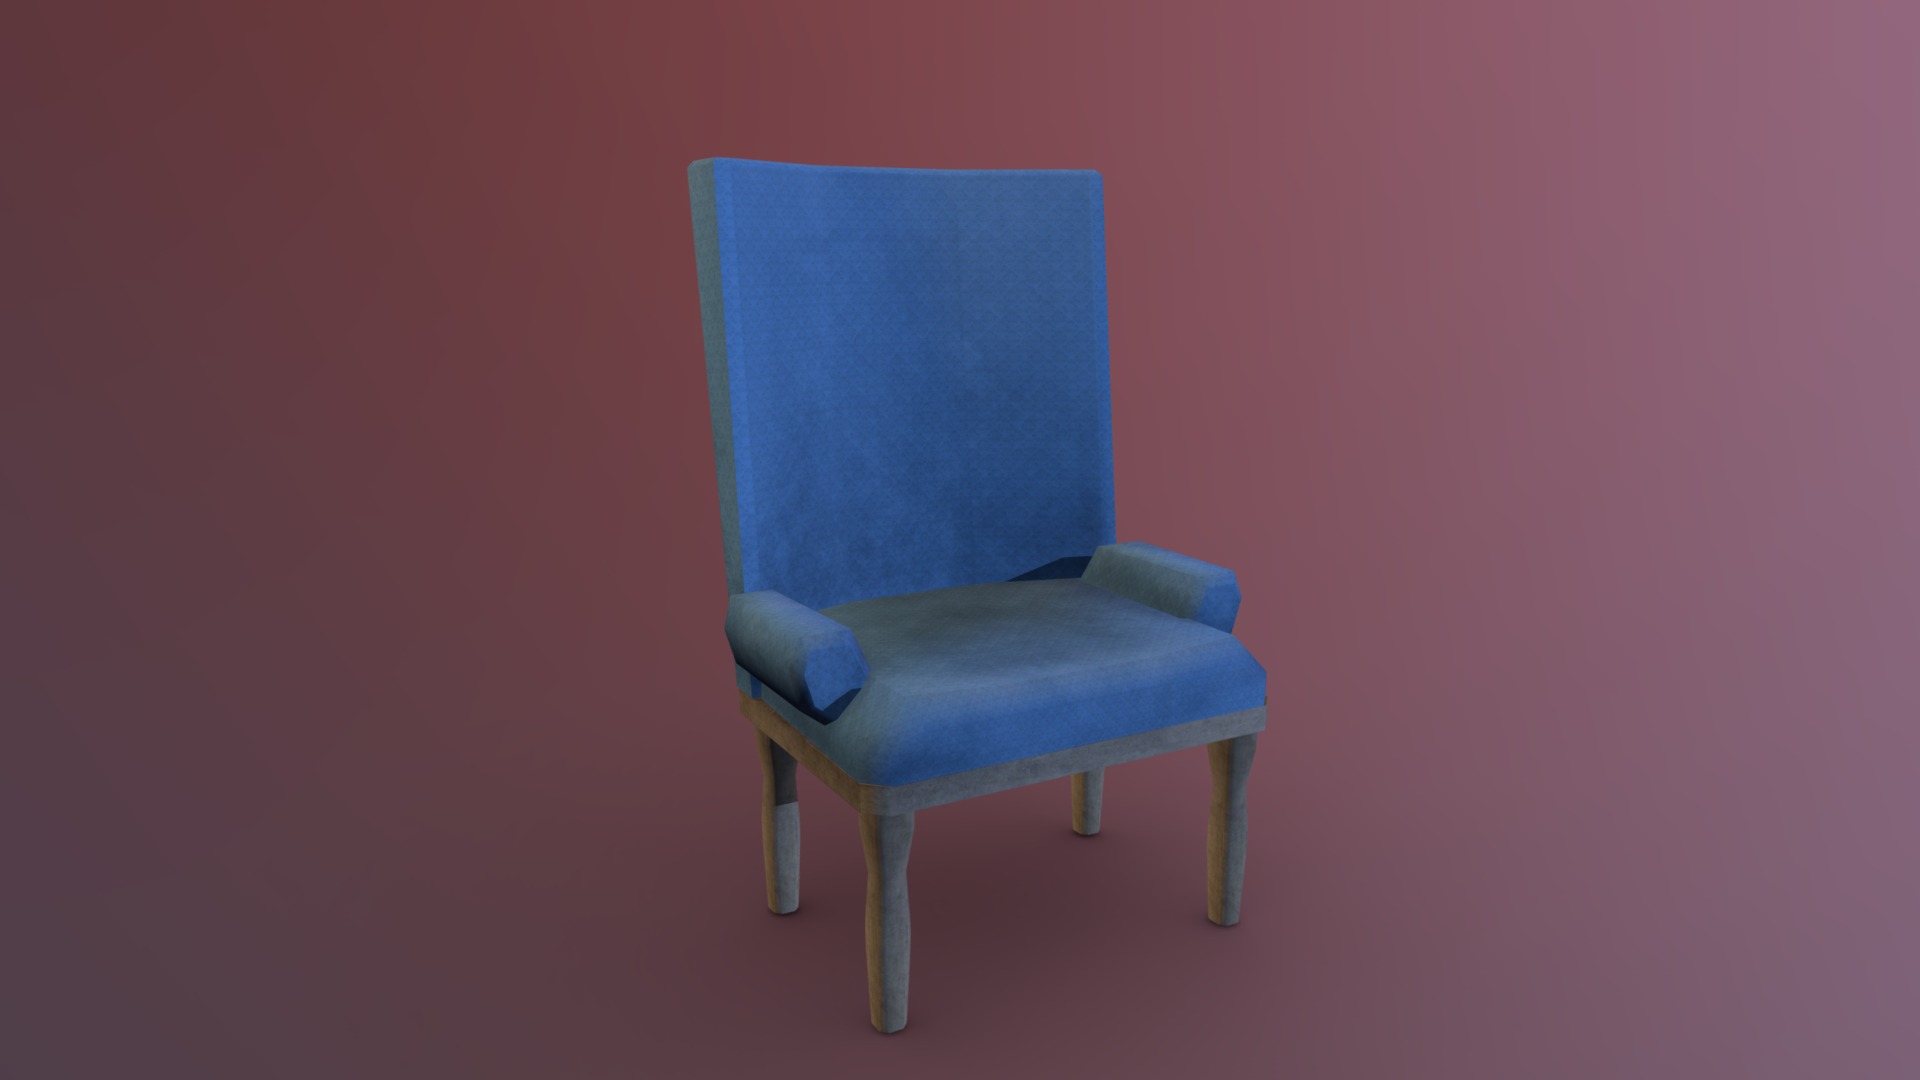 3D model Vintage Armchair - This is a 3D model of the Vintage Armchair. The 3D model is about a blue chair against a pink background.